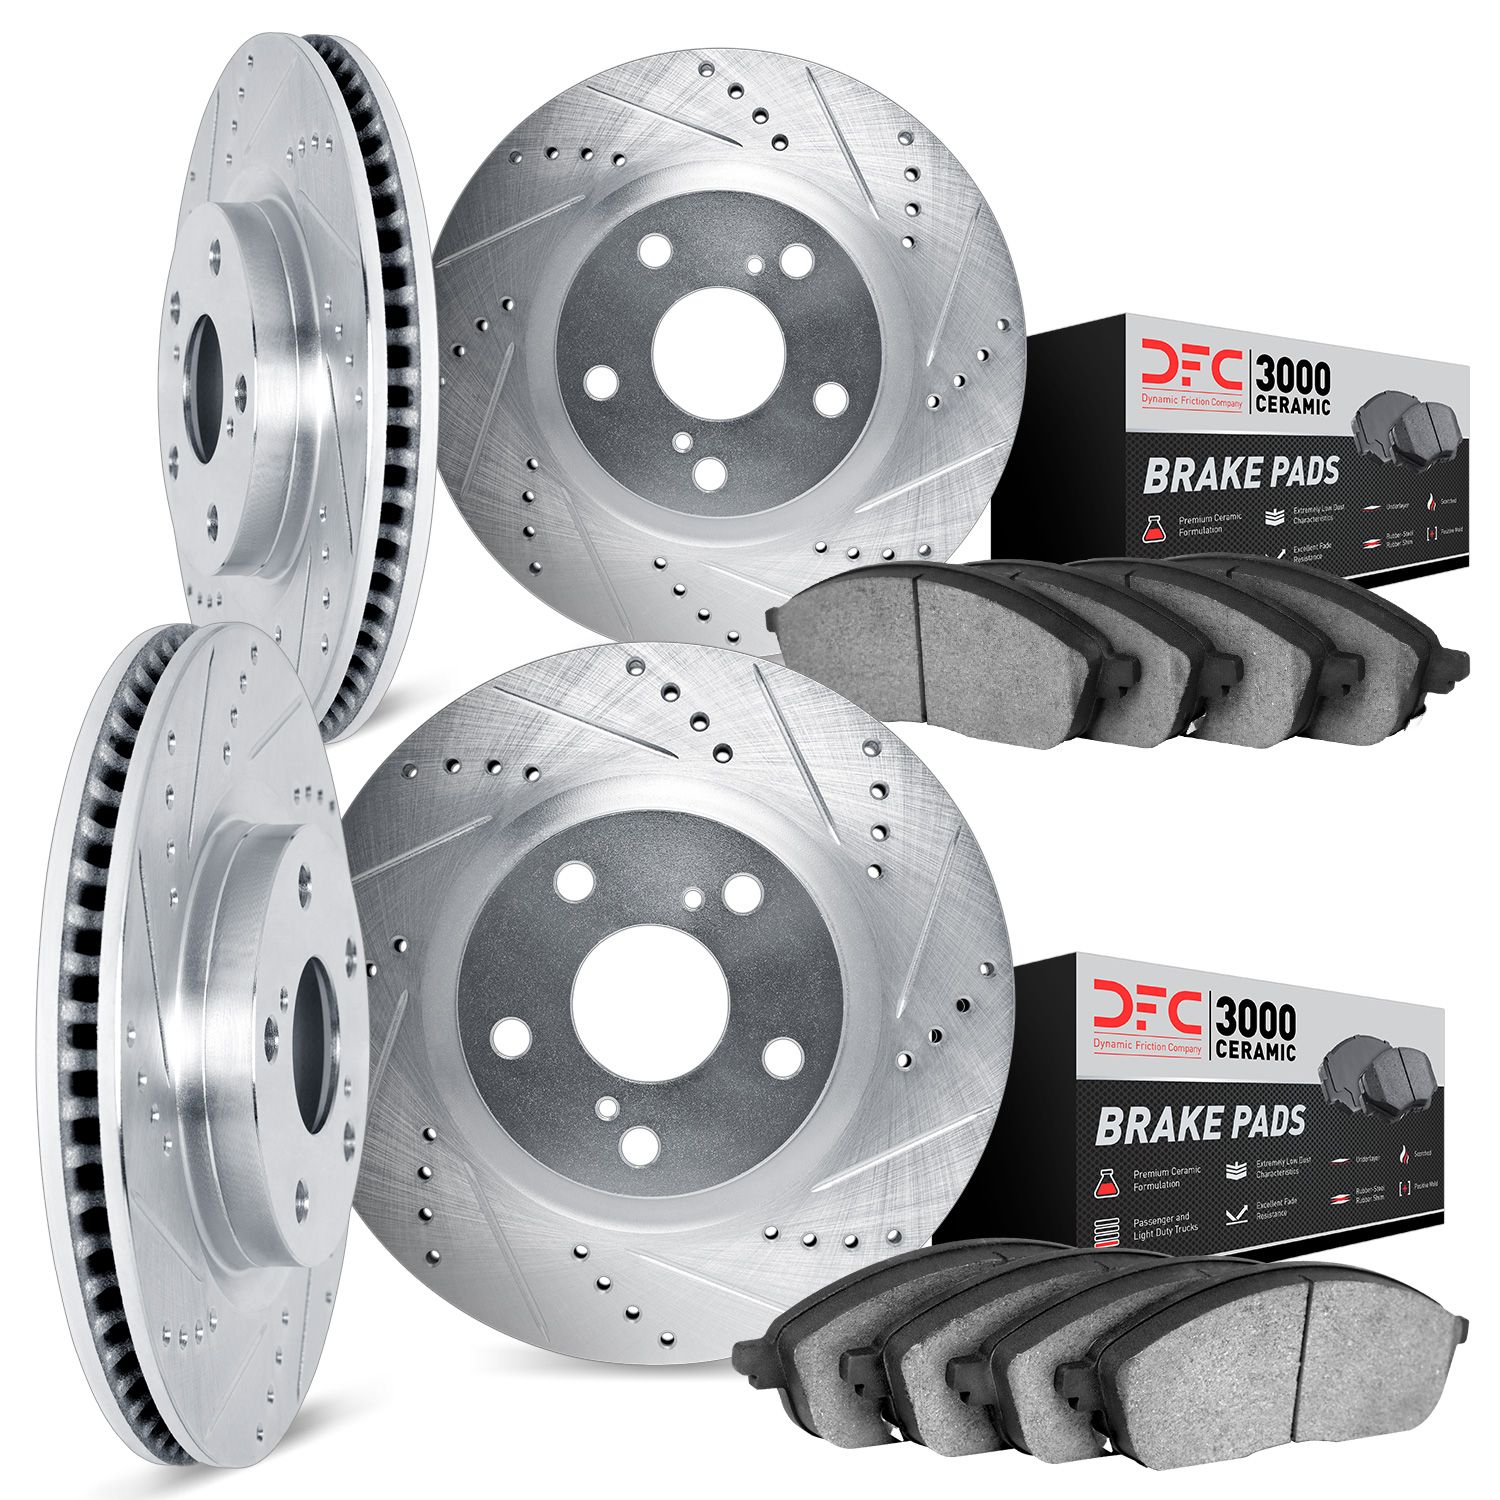 7304-75001 Drilled/Slotted Brake Rotor with 3000-Series Ceramic Brake Pads Kit [Silver], 1990-1990 Lexus/Toyota/Scion, Position: